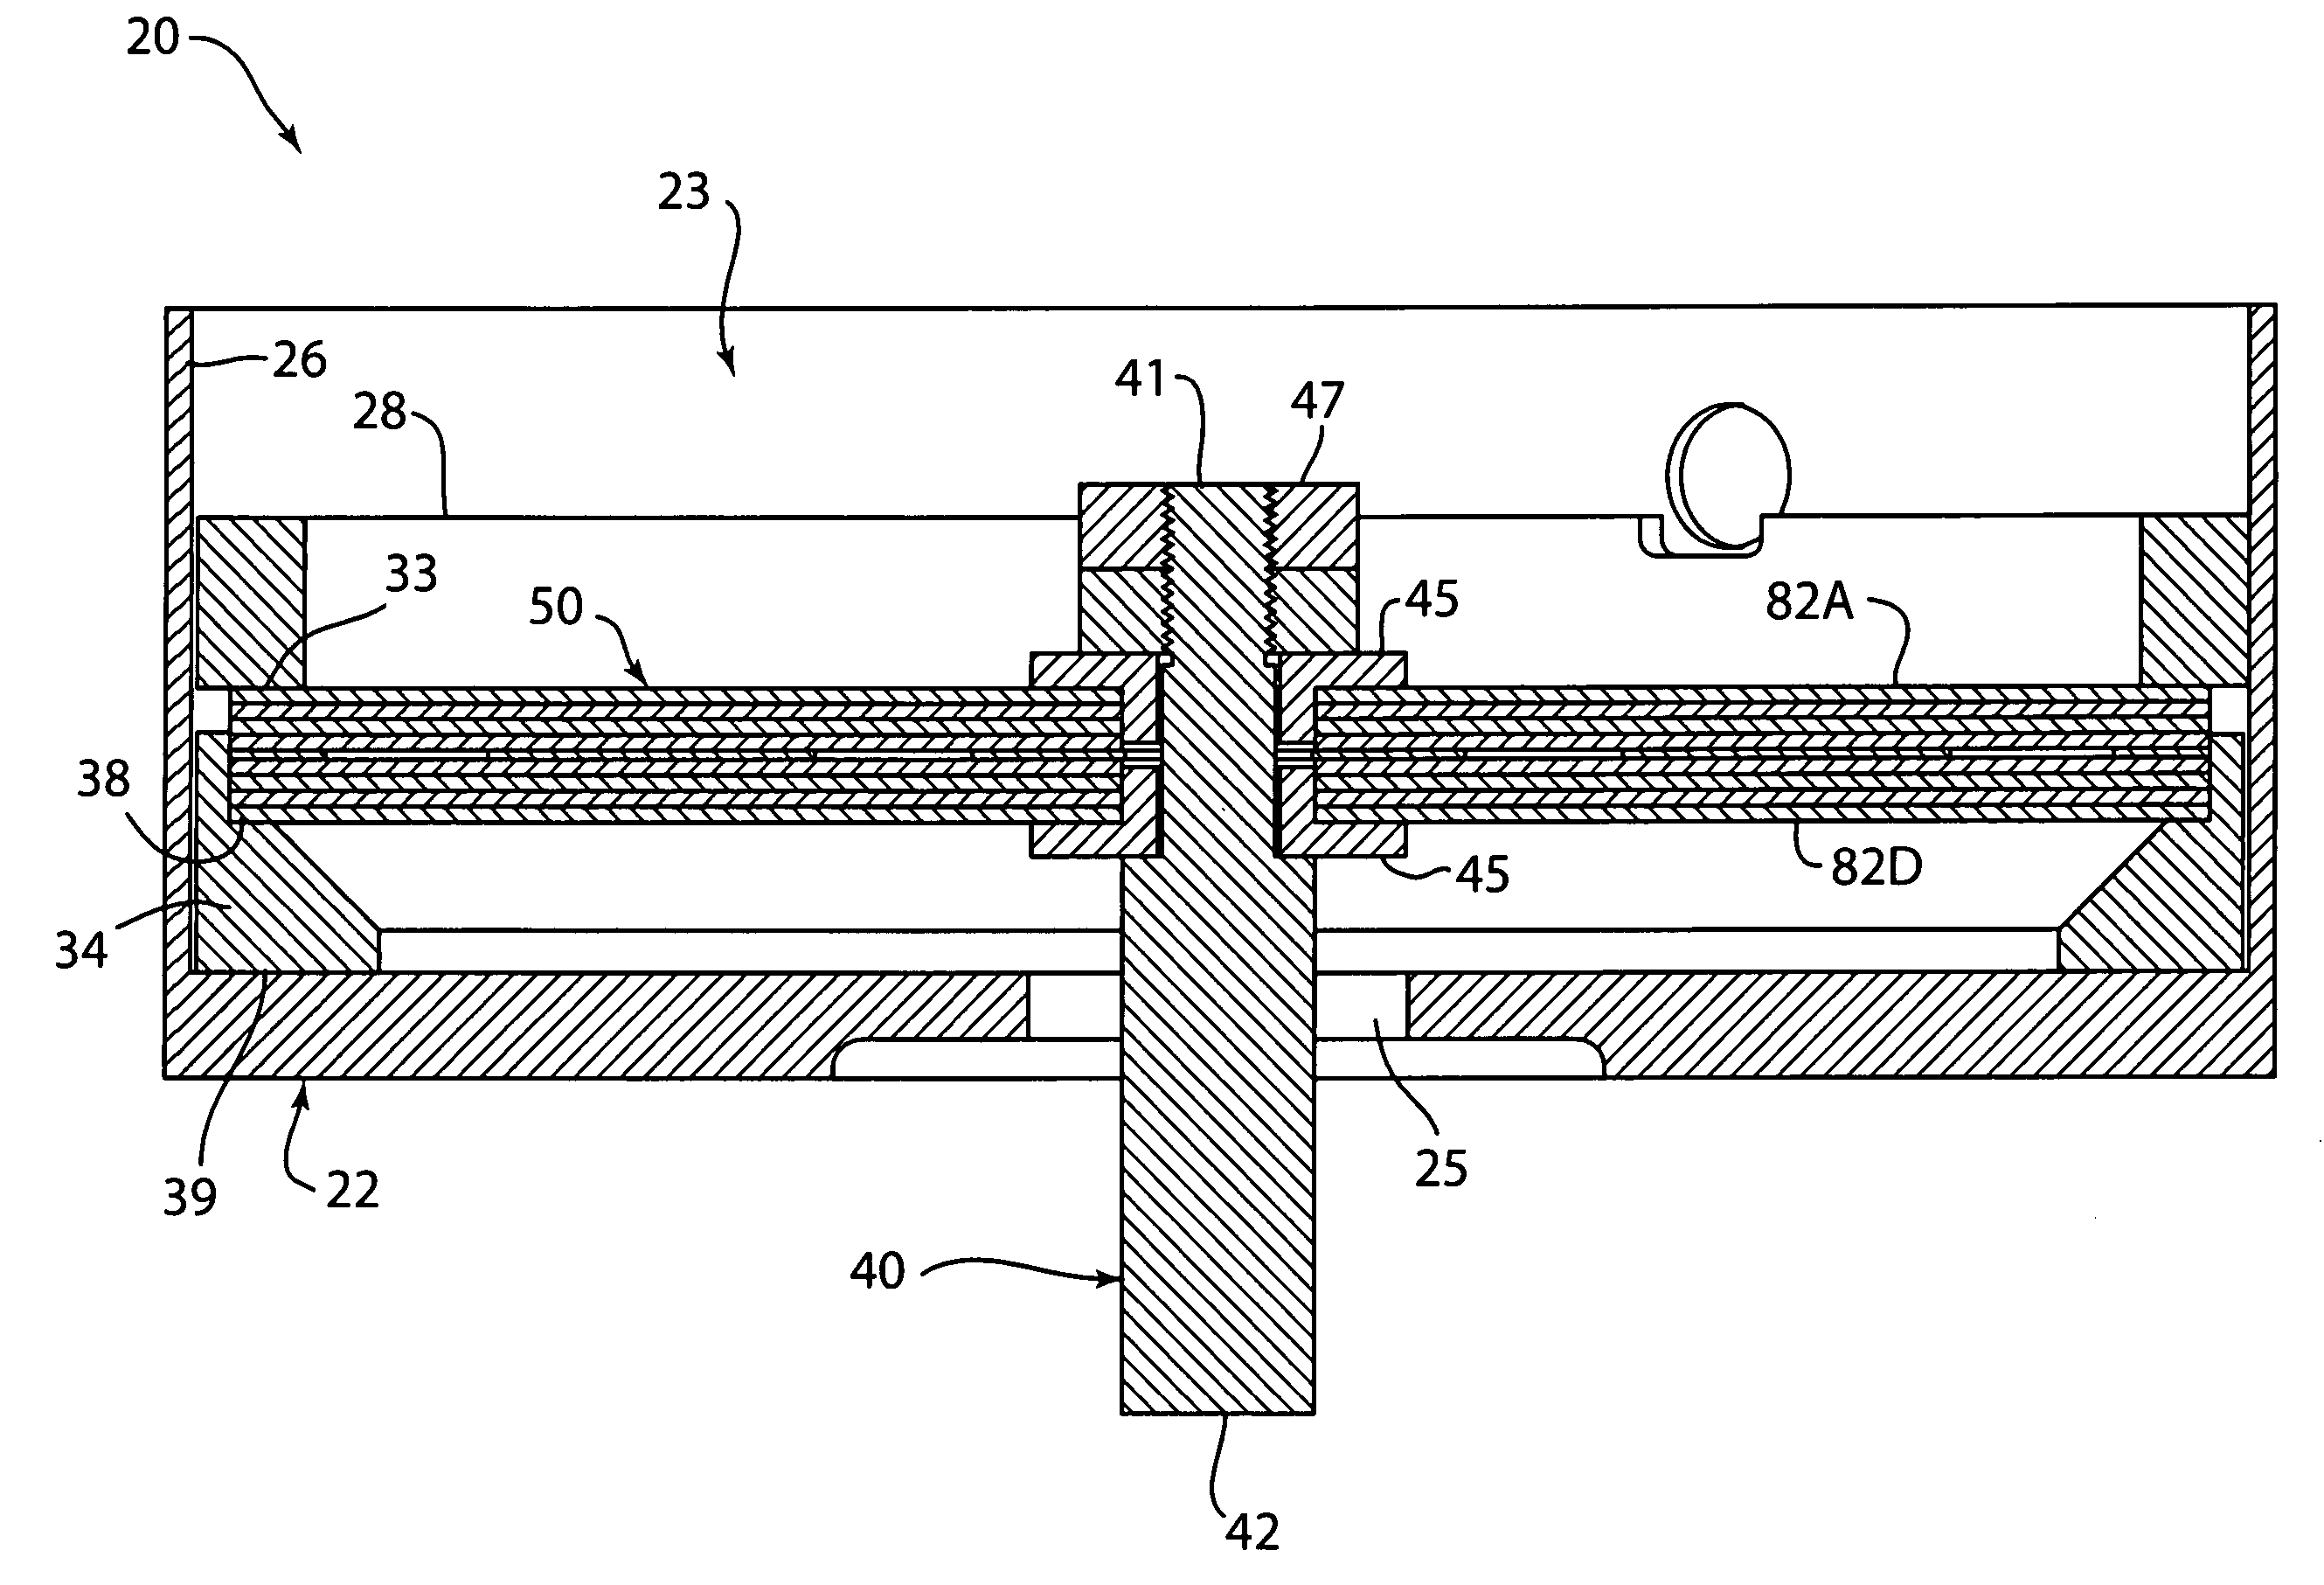 Piezoelectric actuator having minimal displacement drift with temperature and high durability